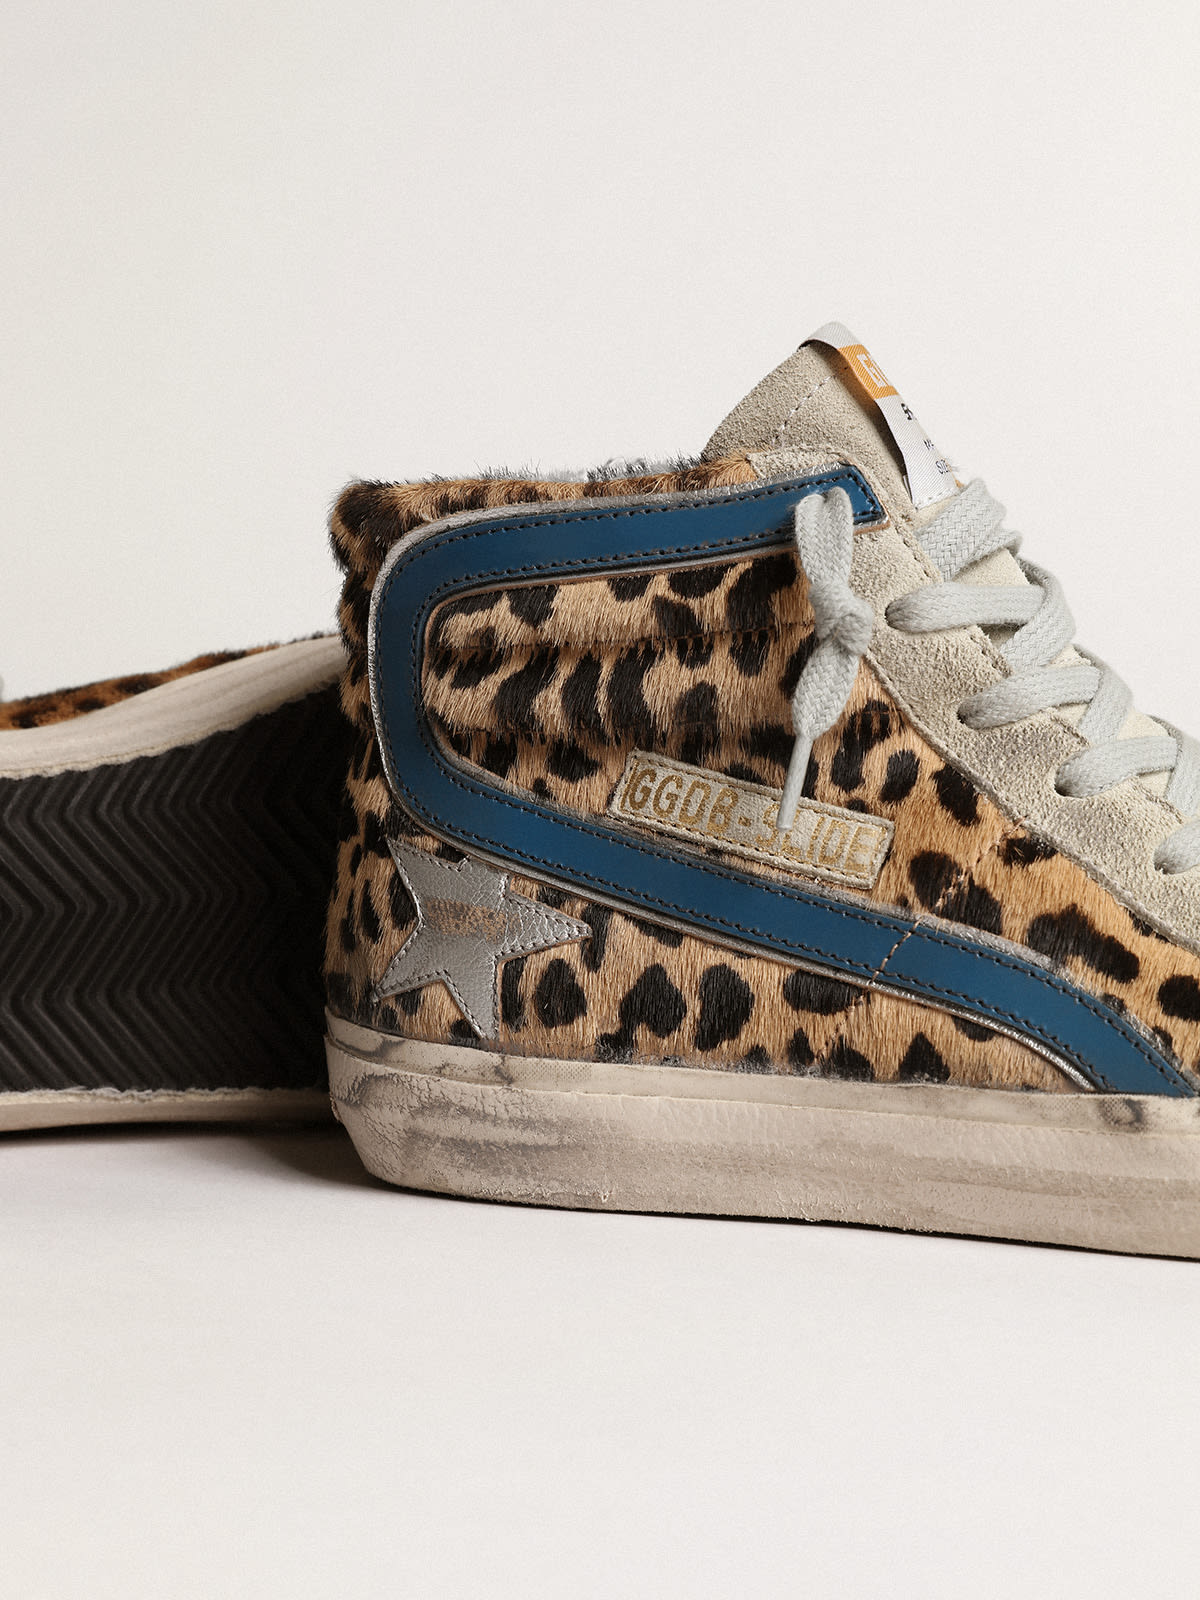 Golden Goose - Slide in leopard-print pony skin with metallic leather star in 